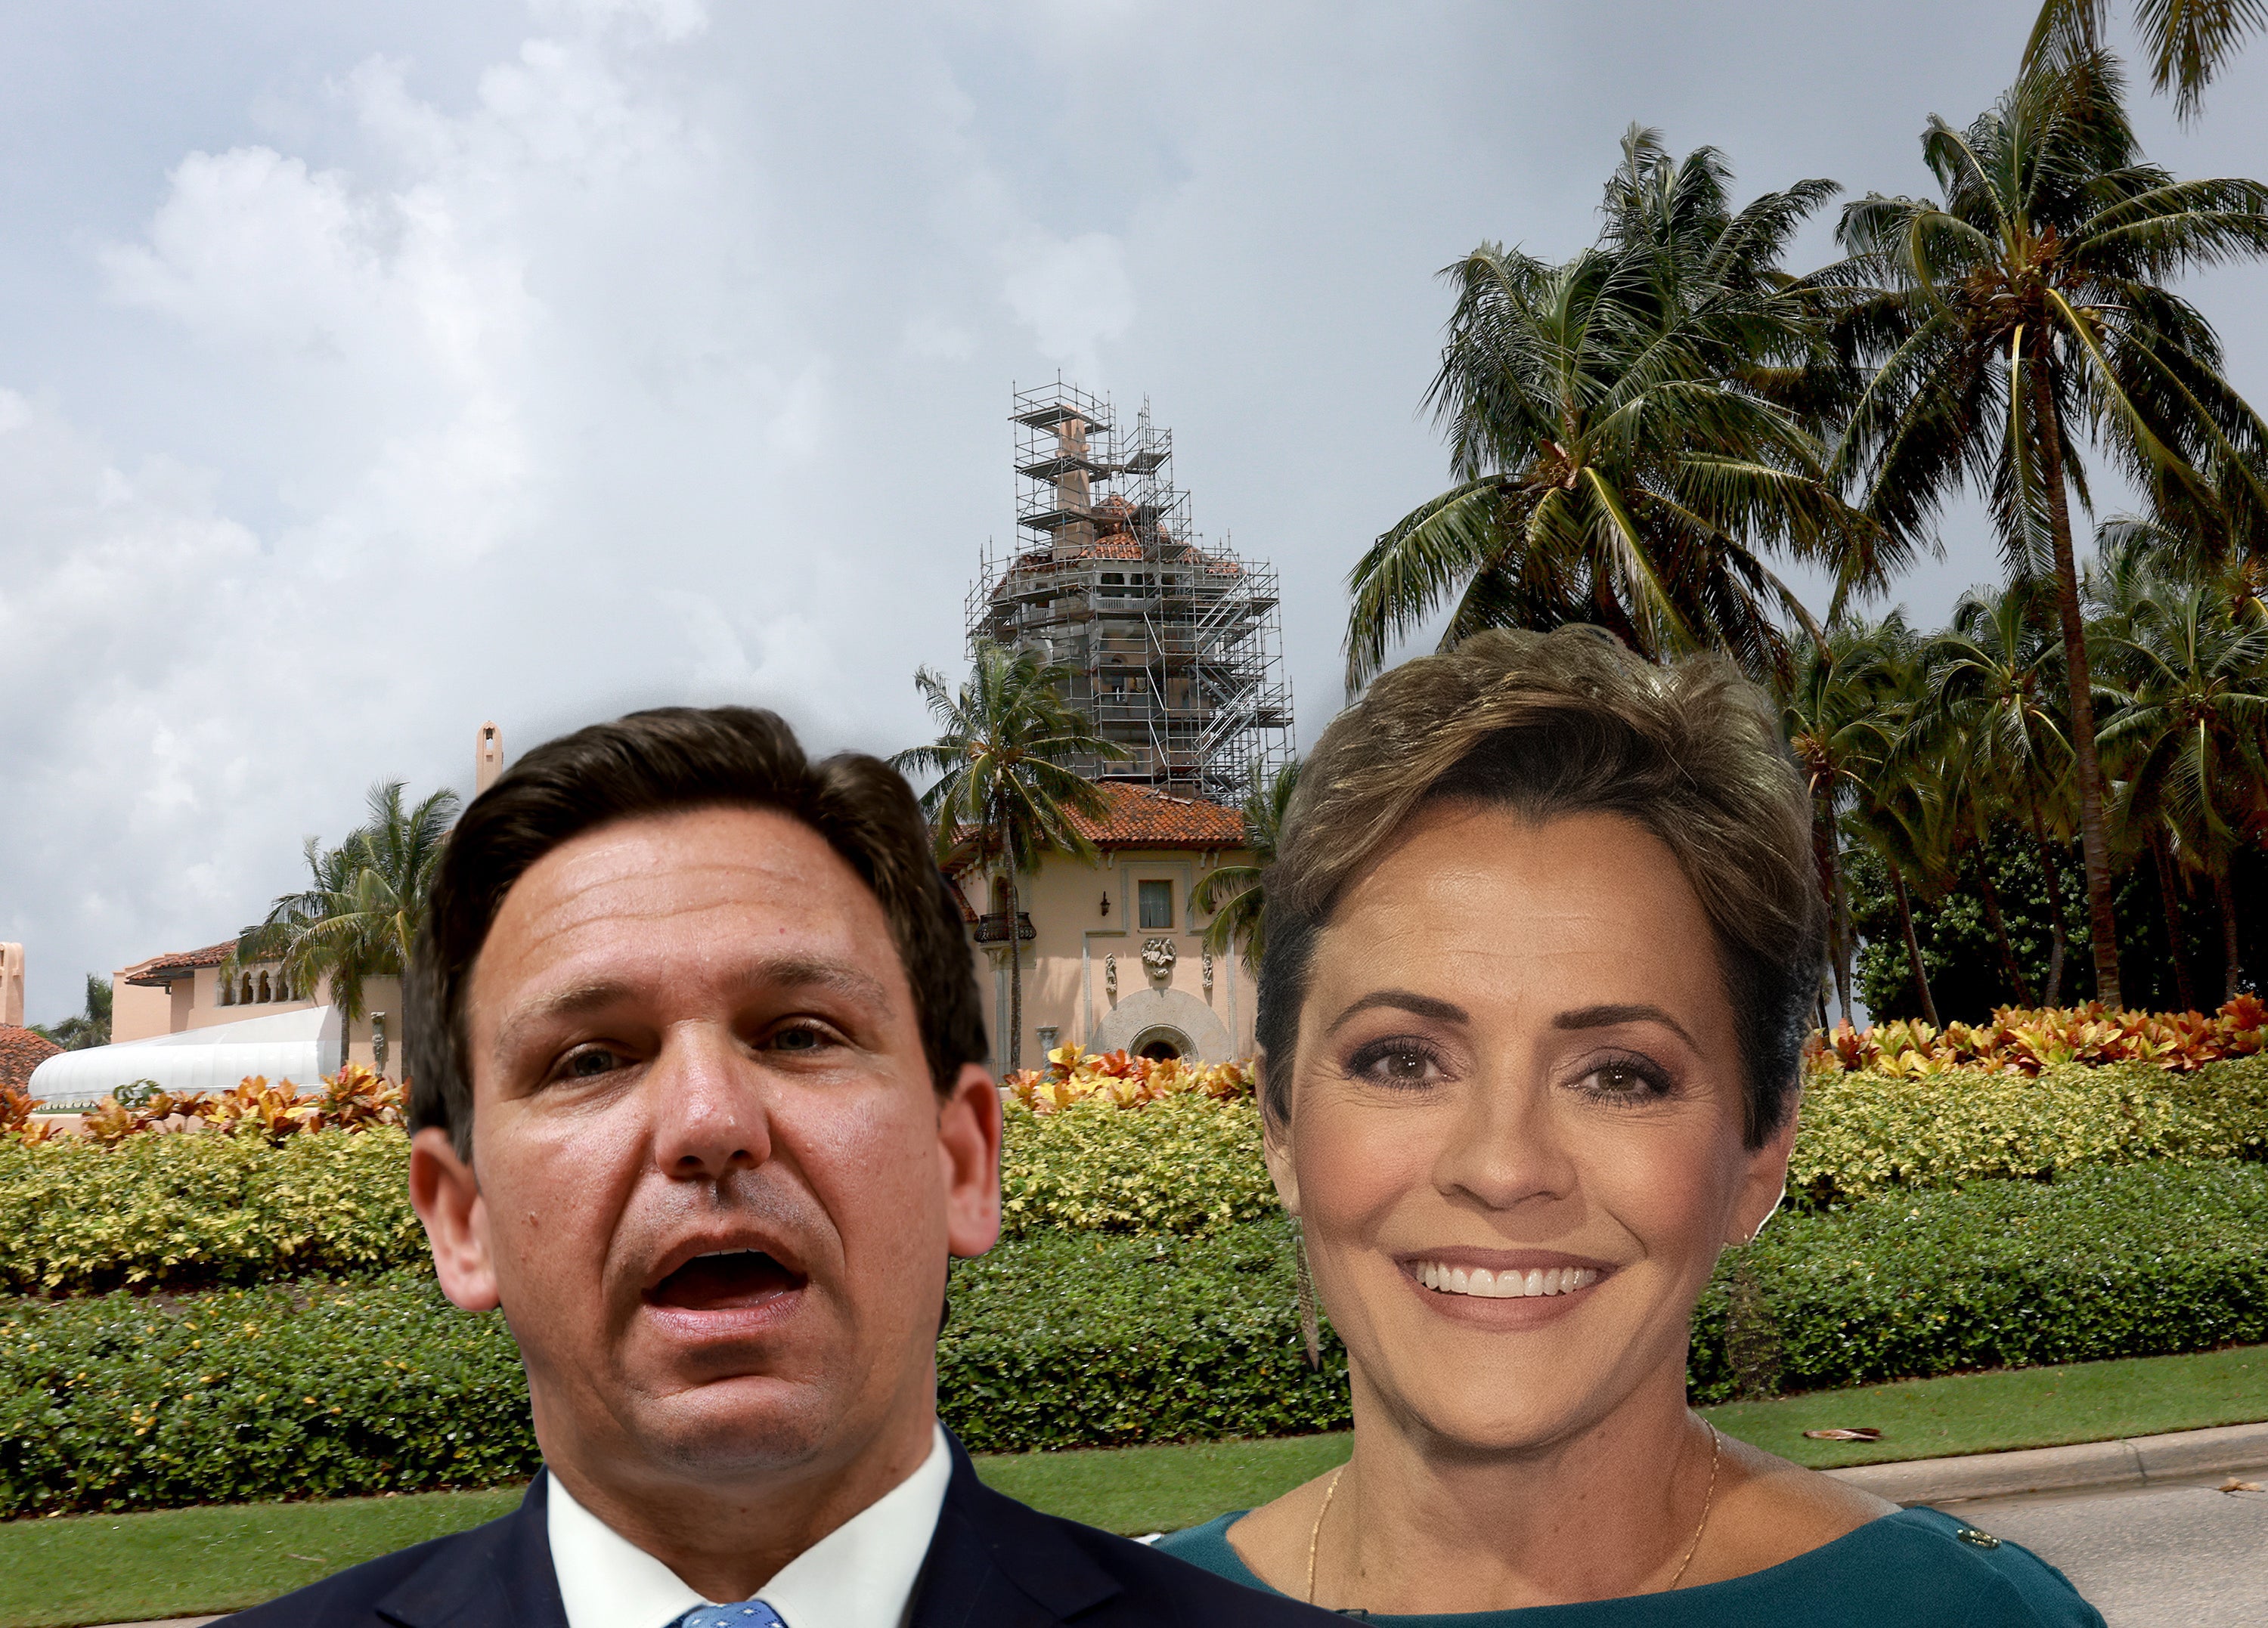 Ron DeSantis and Kari Lake seem particularly fond of spending time with the former president